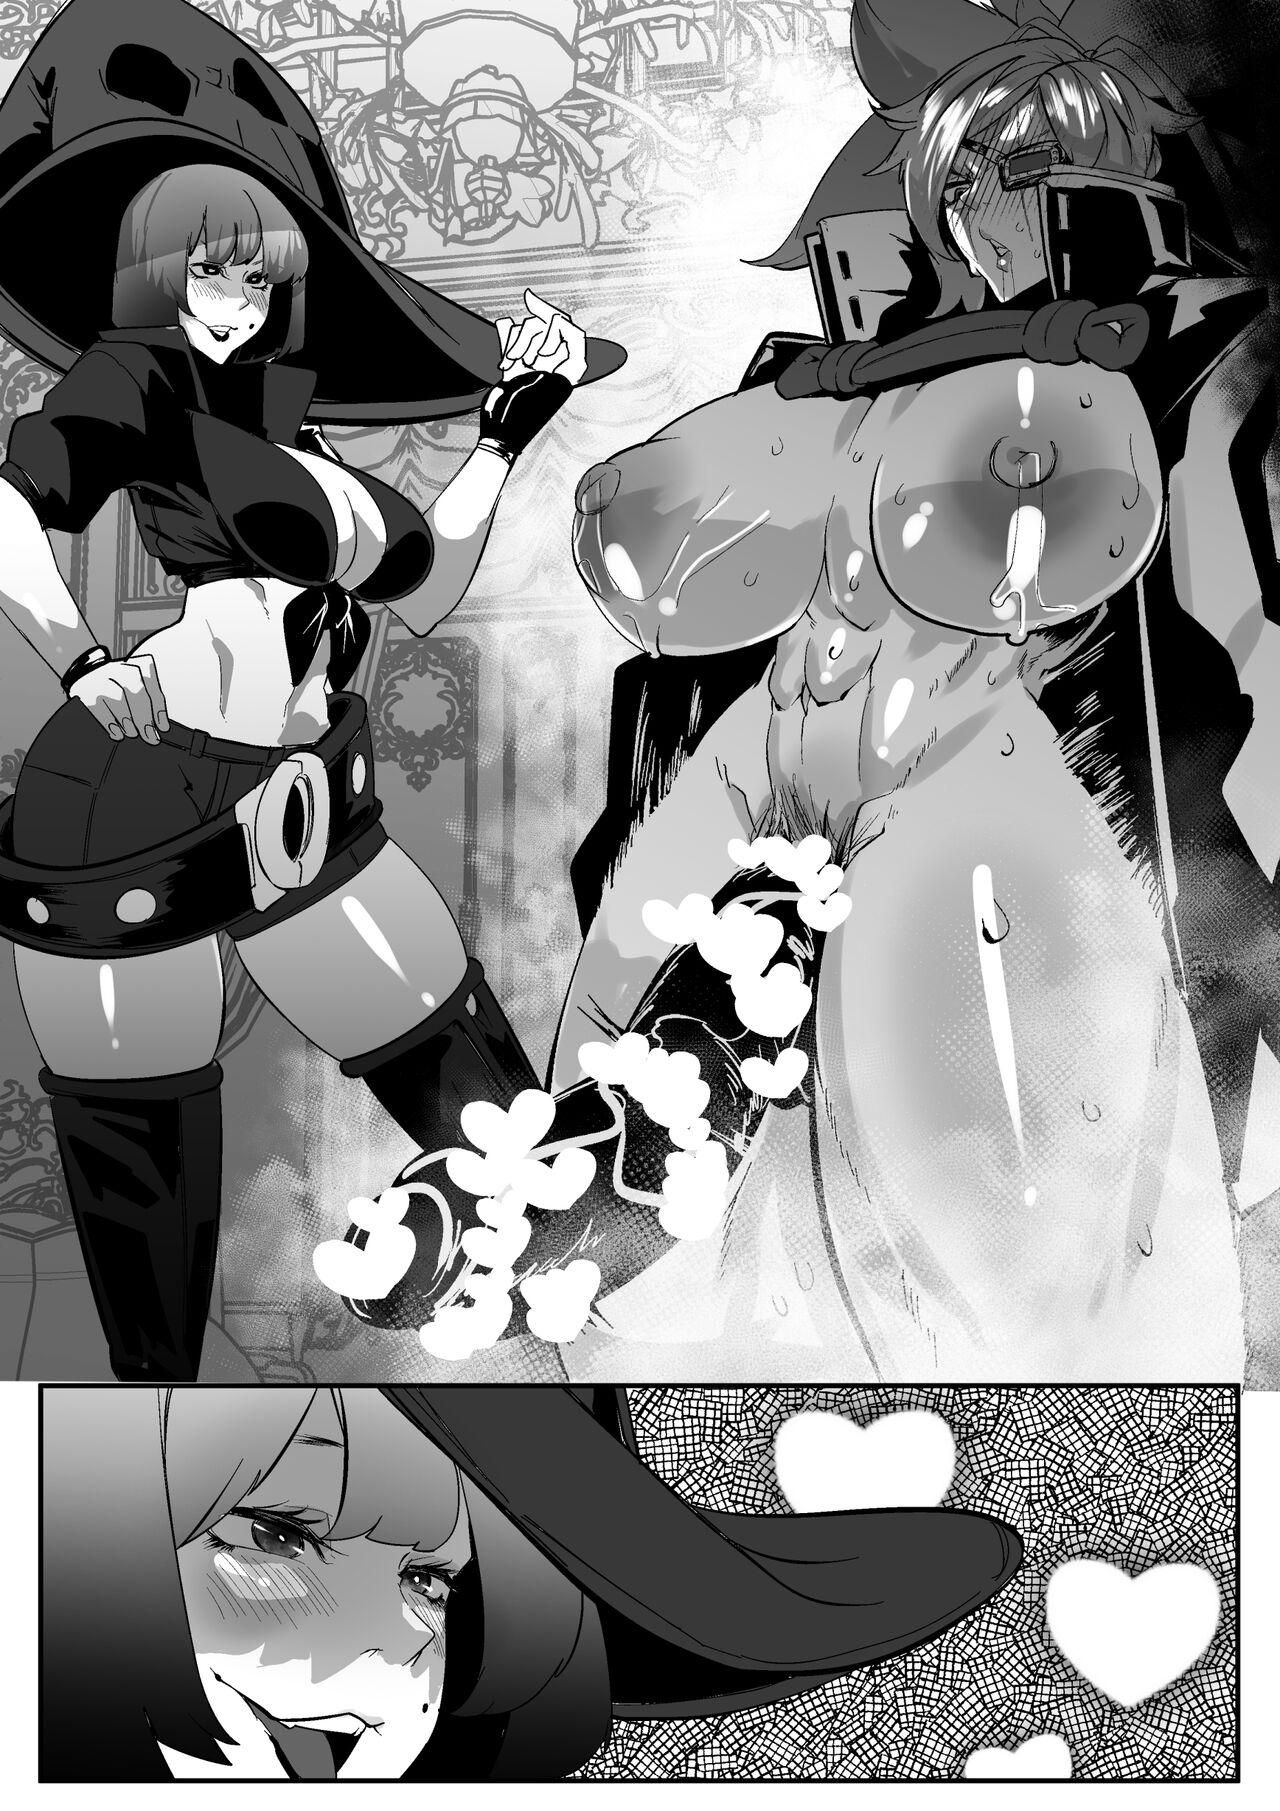 Concha [Mr.way] 生えちゃった梅喧姐さんとイノ (ギルティギア)（Chinese） - Guilty gear High - Page 6